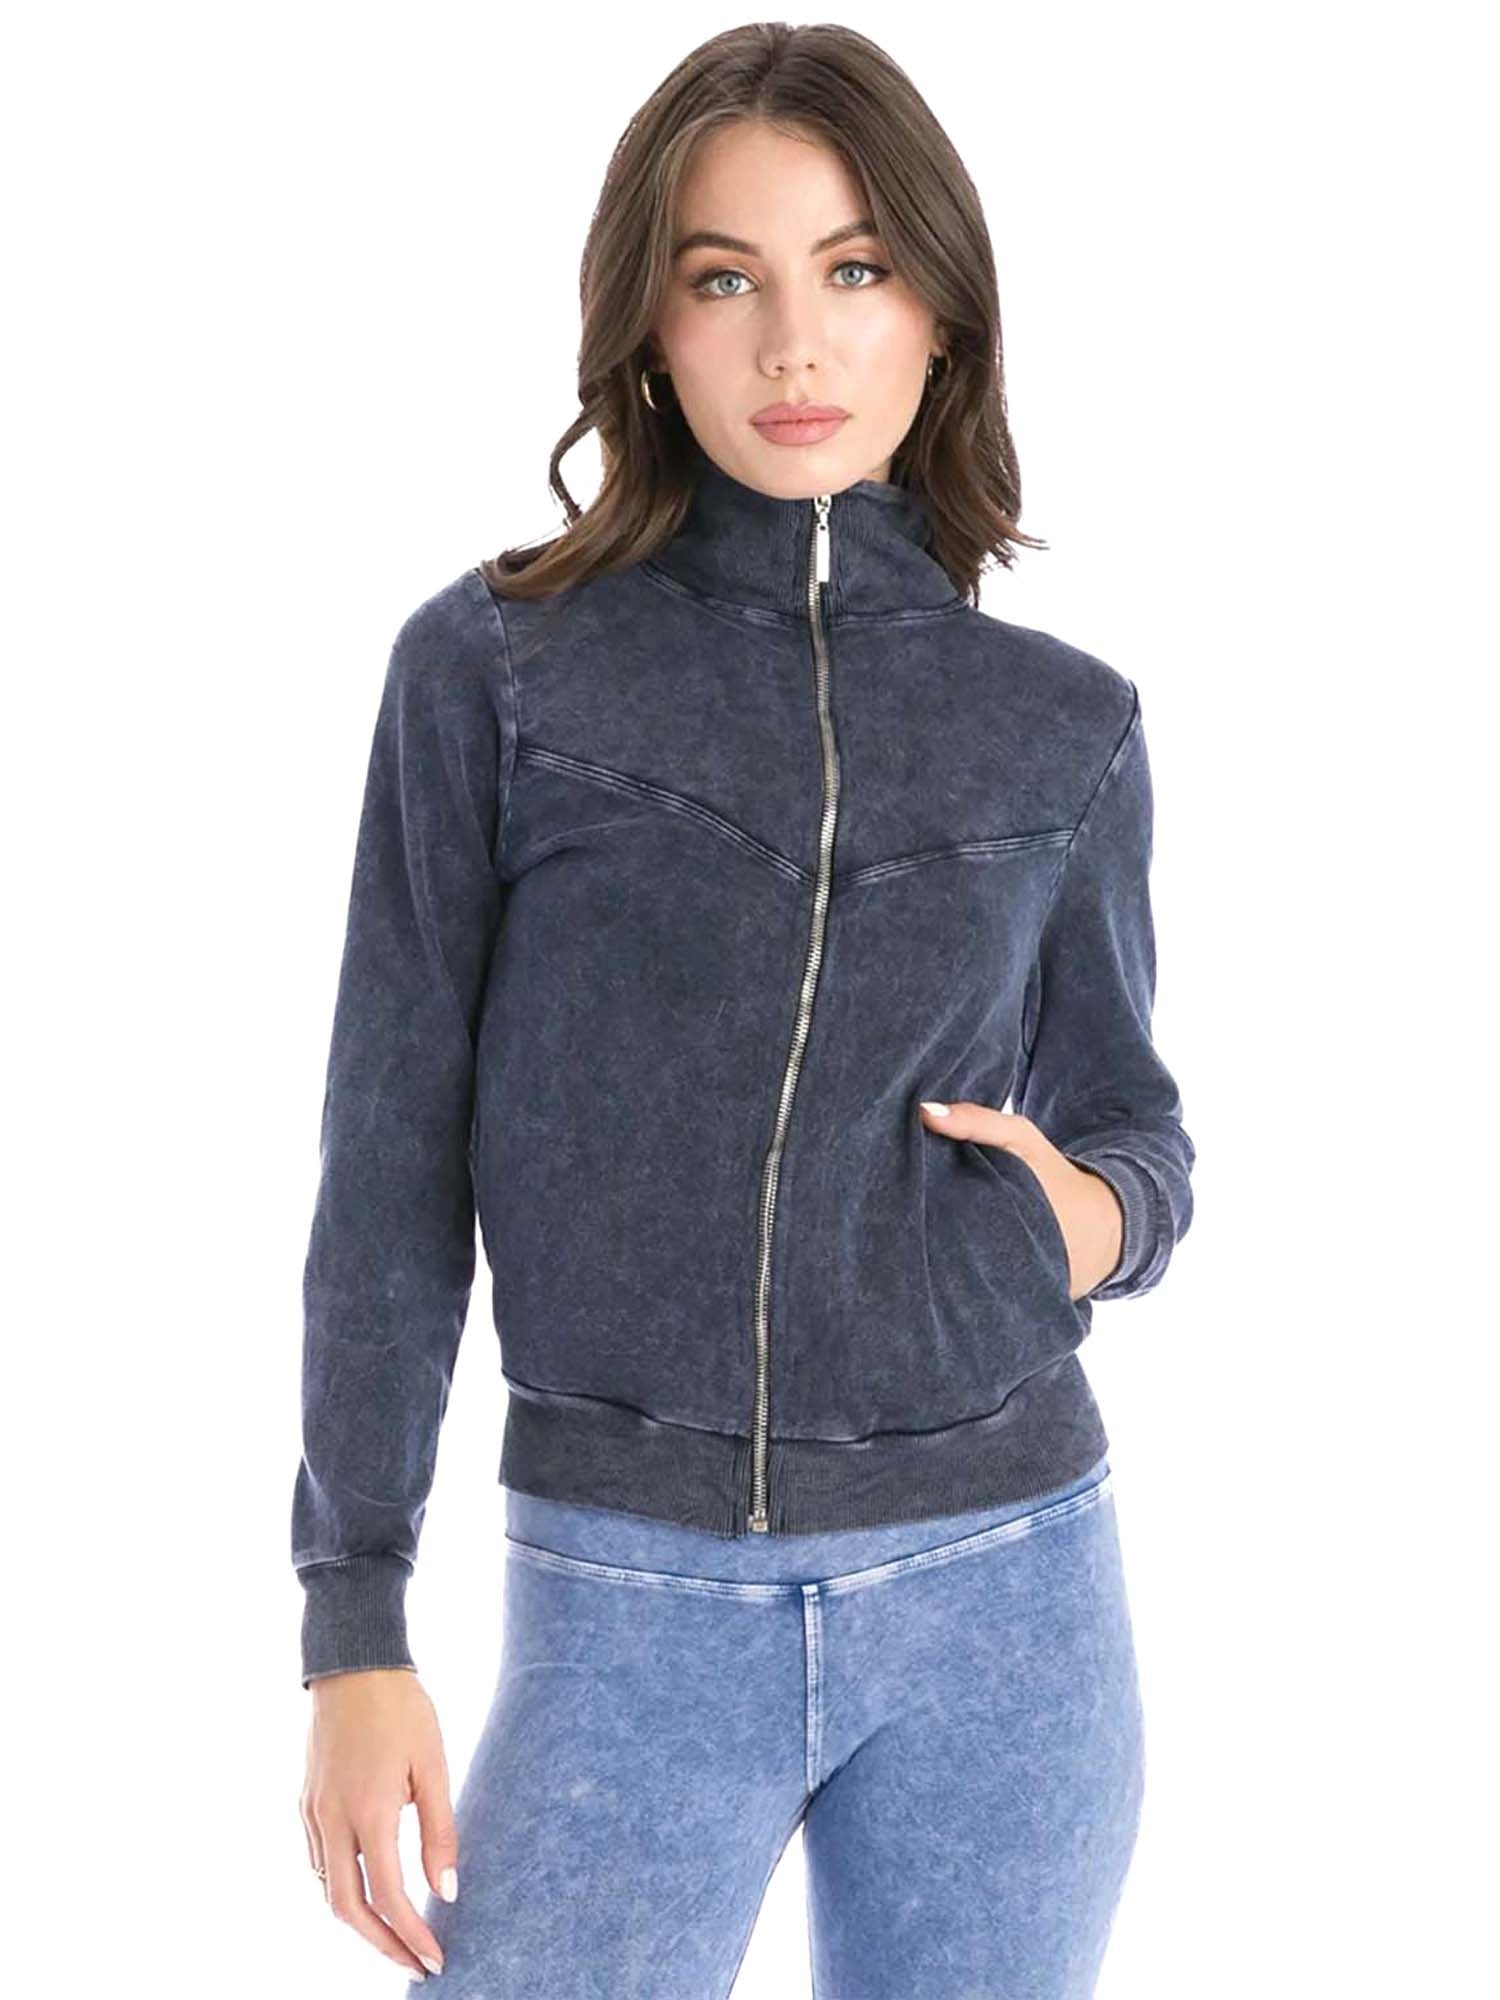 Hard Tail High Neck Zip Jacket (Style: B-174) - Tops